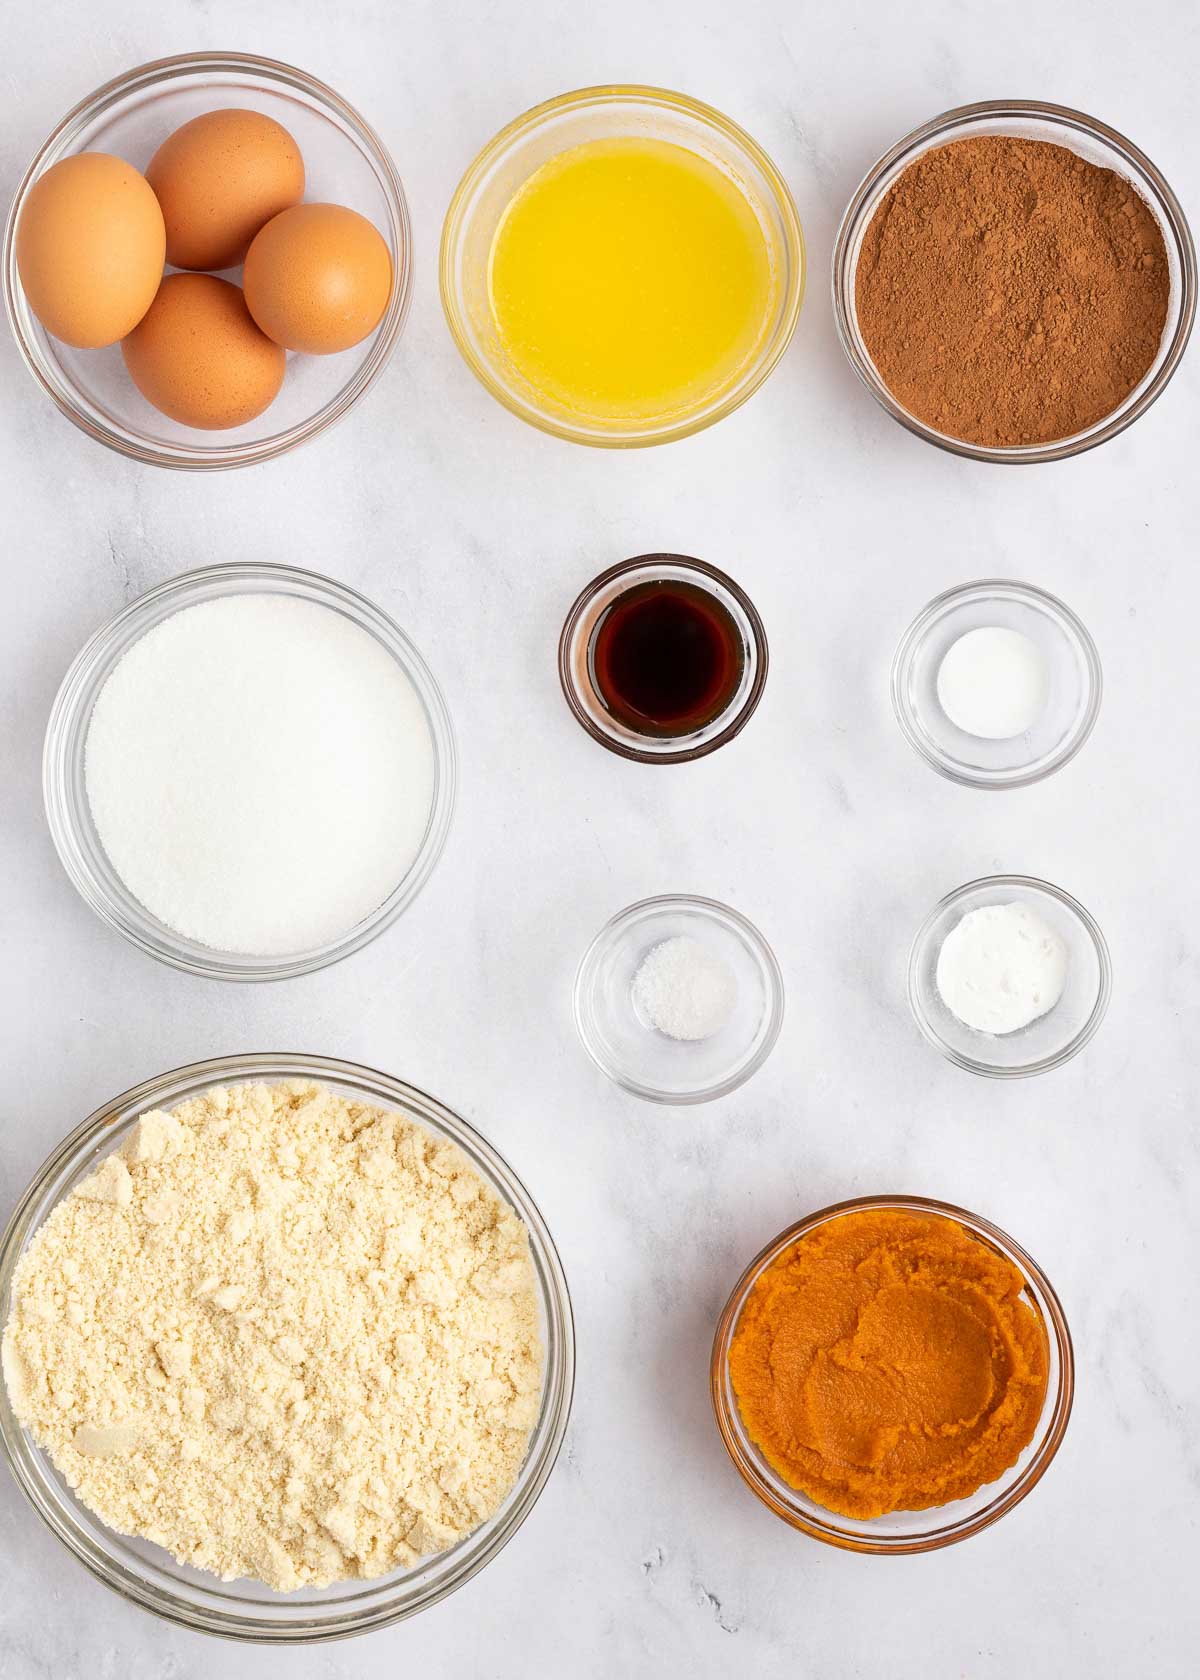 Overhead view of the ingredients needed for keto chocolate cake: a bowl of eggs, a bowl of melted butter, a bowl of cocoa powder, a bowl of almond flour, a bowl of pumpkin puree, a bowl of baking soda, a bowl of baking powder, a bowl of salt, a bowl of vanilla extract, and a bowl of monk fruit sweetener